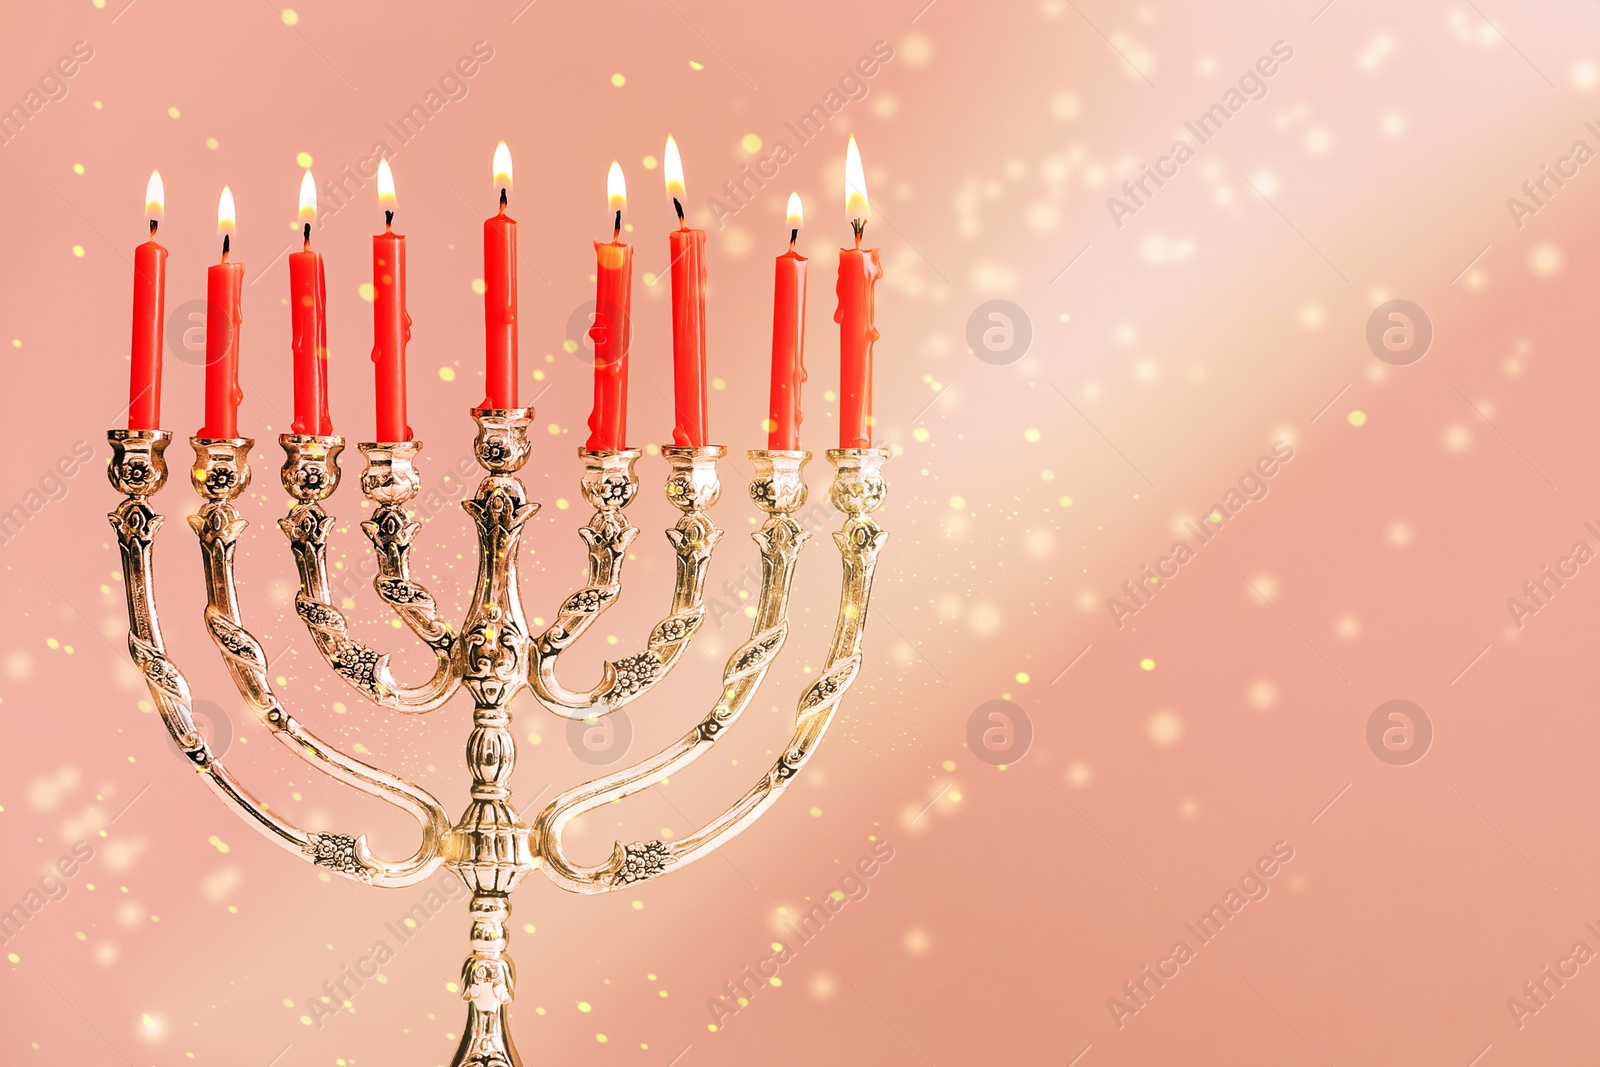 Image of Menorah with burning candles on color background, space for text. Hanukkah celebration